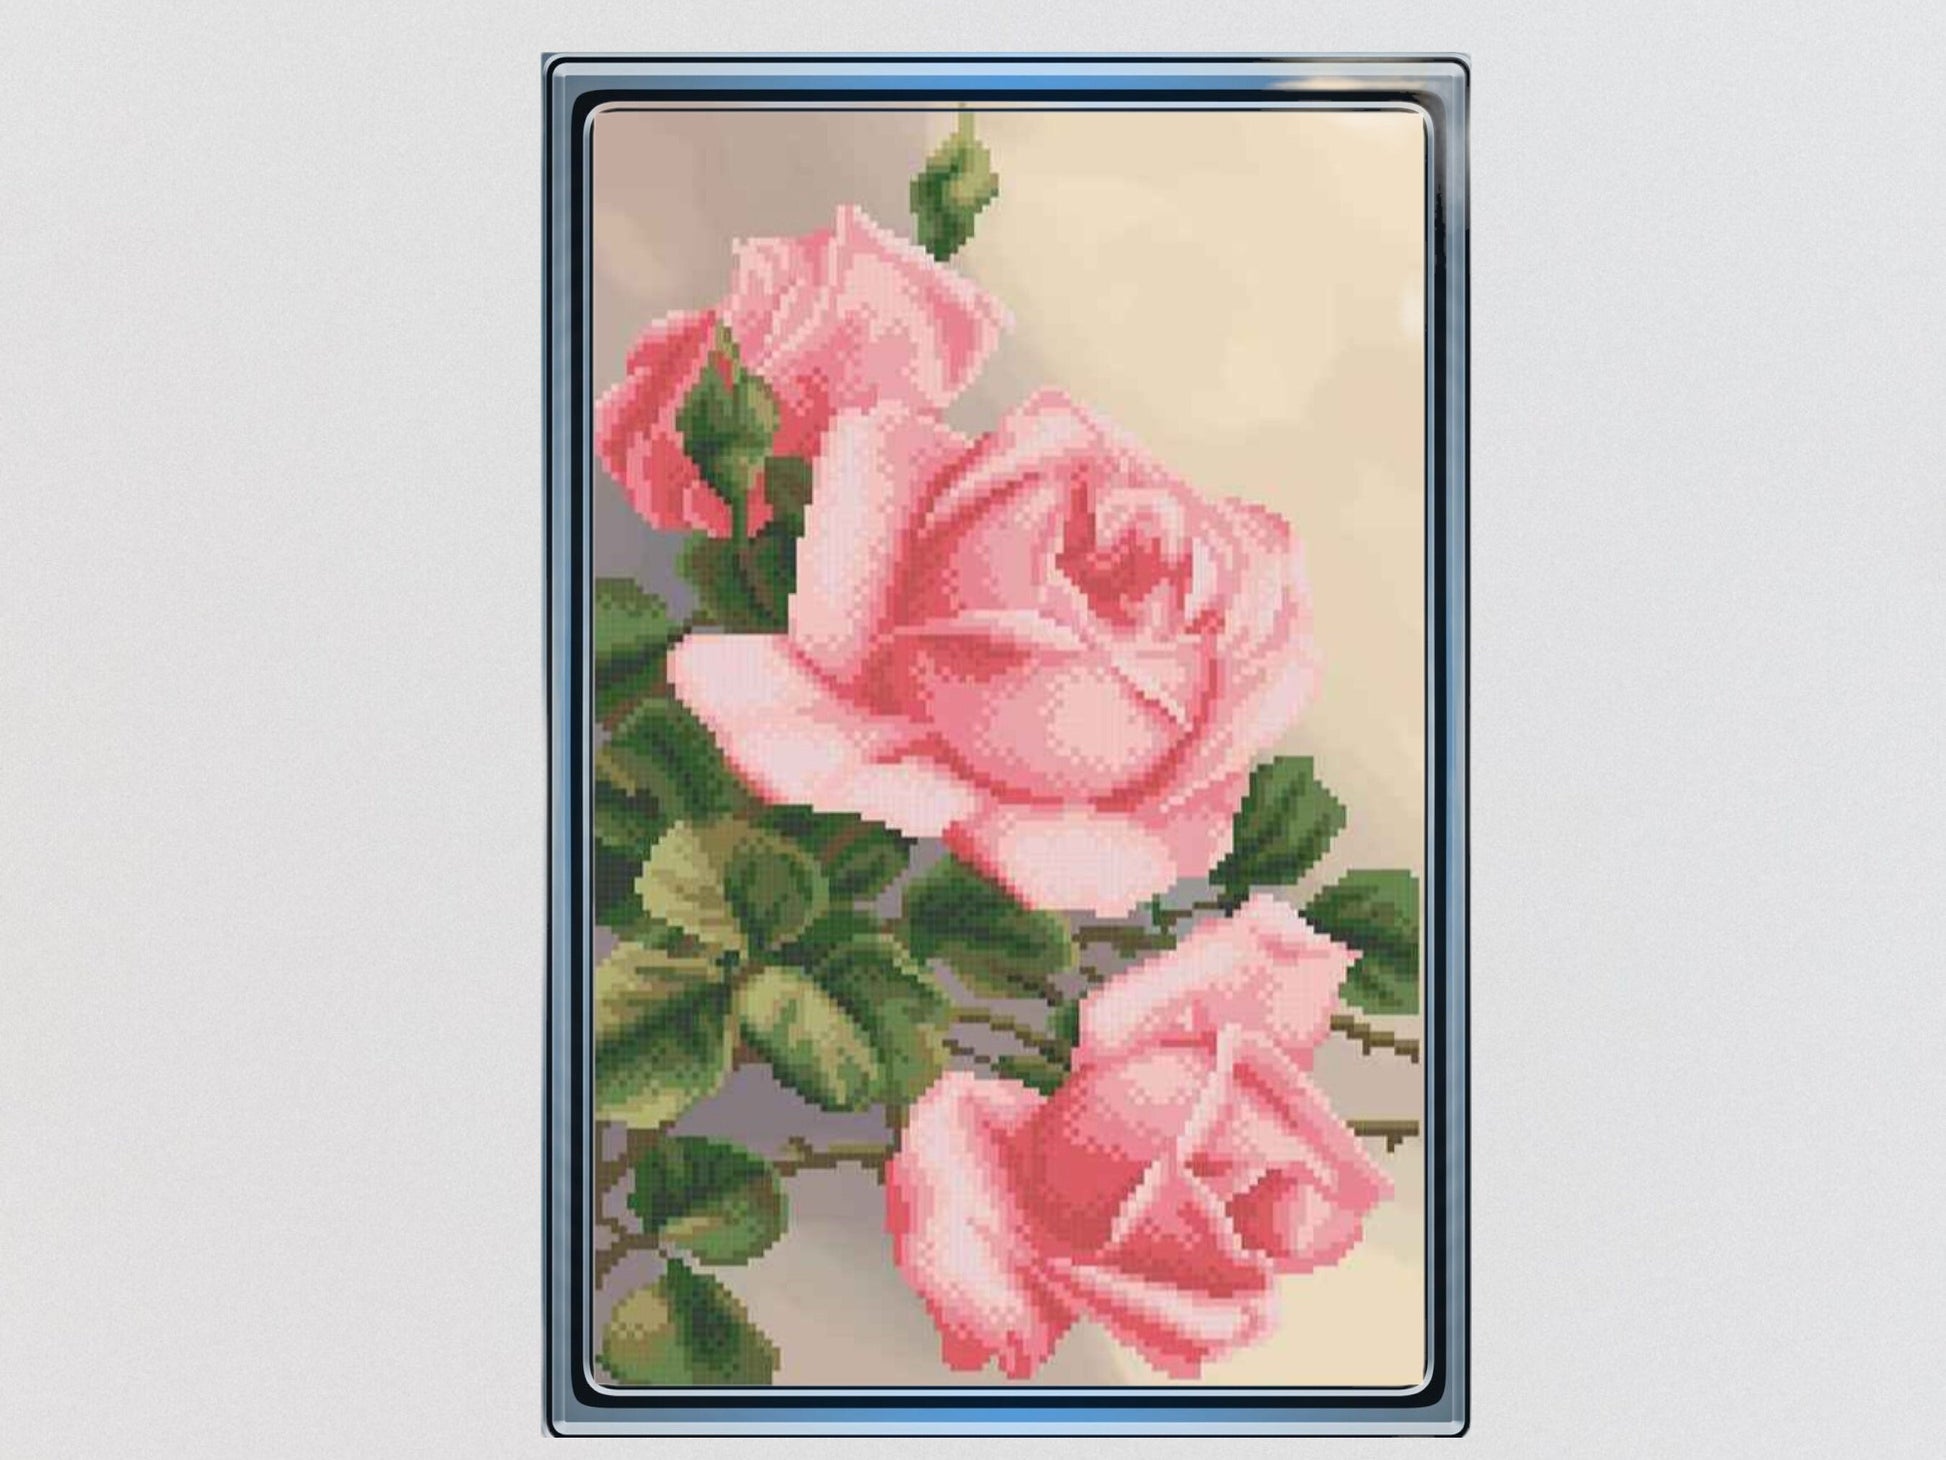 DIY Bead embroidery kit "Pink roses". Size: 8.7-13.8in (22-35cm) - VadymShop